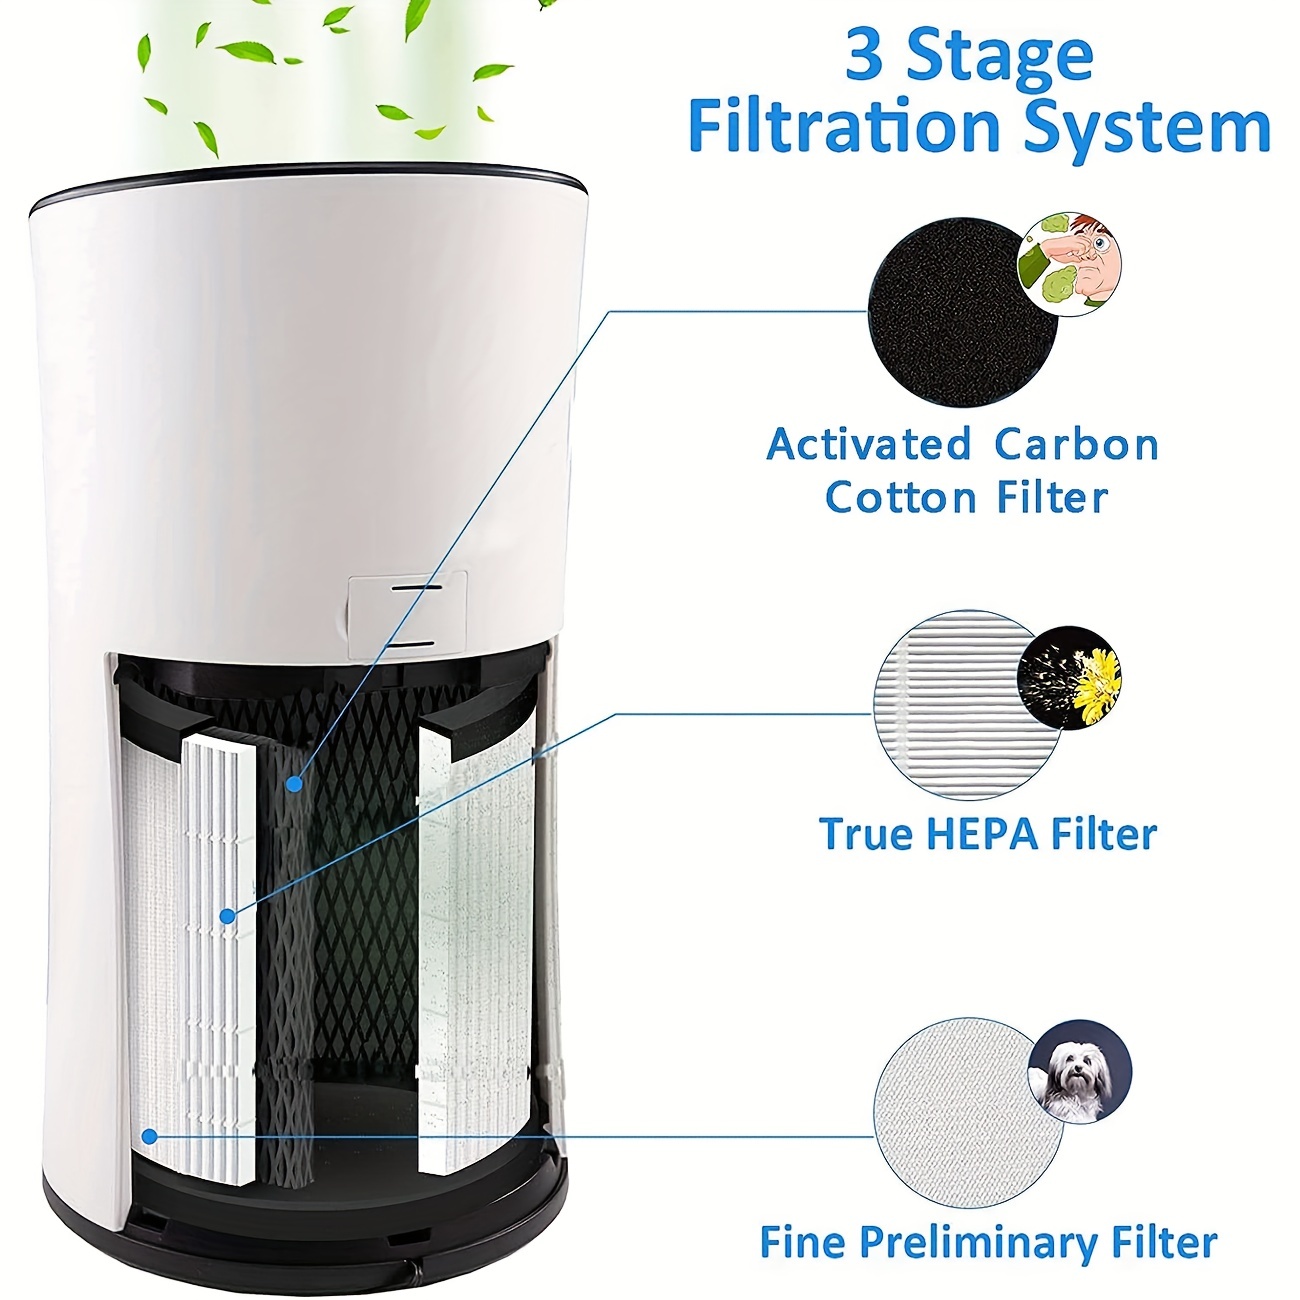 5 Replacement True HEPA & Carbon Filter Sets for Levoit Air Purifier